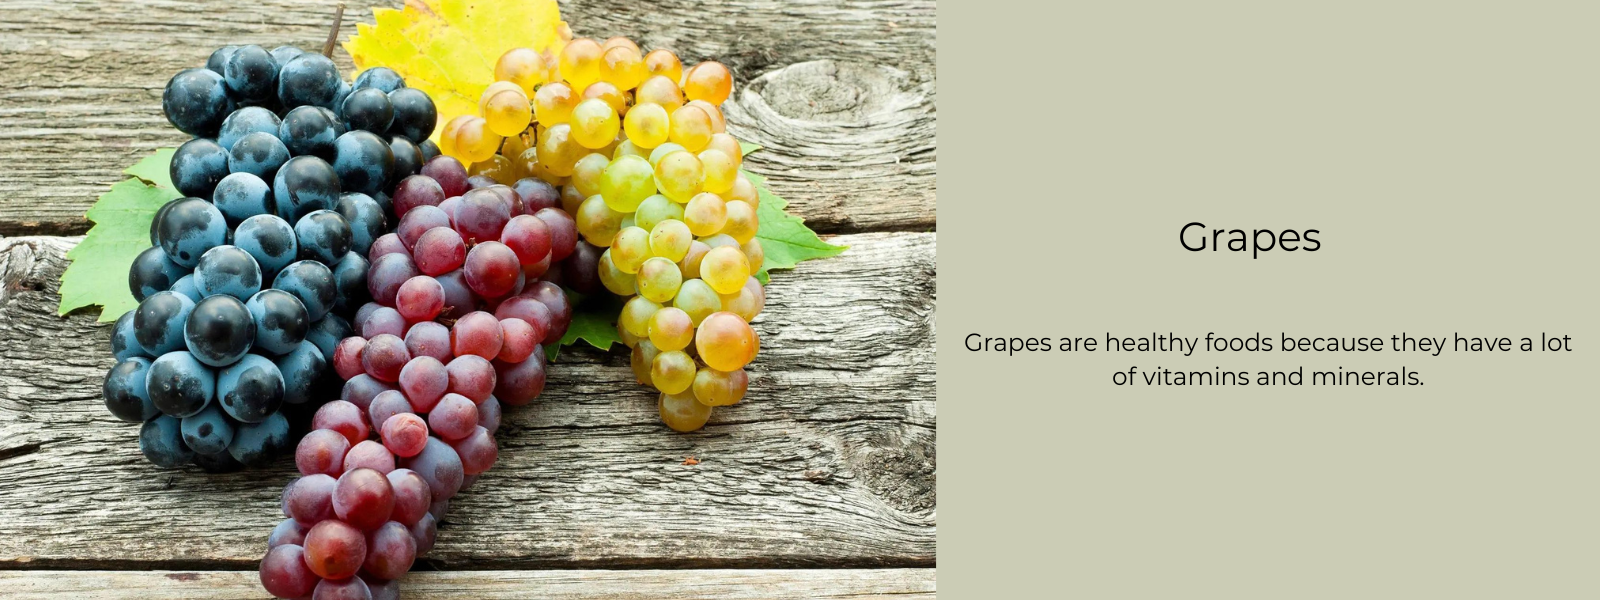 Grapes - Health Benefits, Uses and Important Facts - PotsandPans India